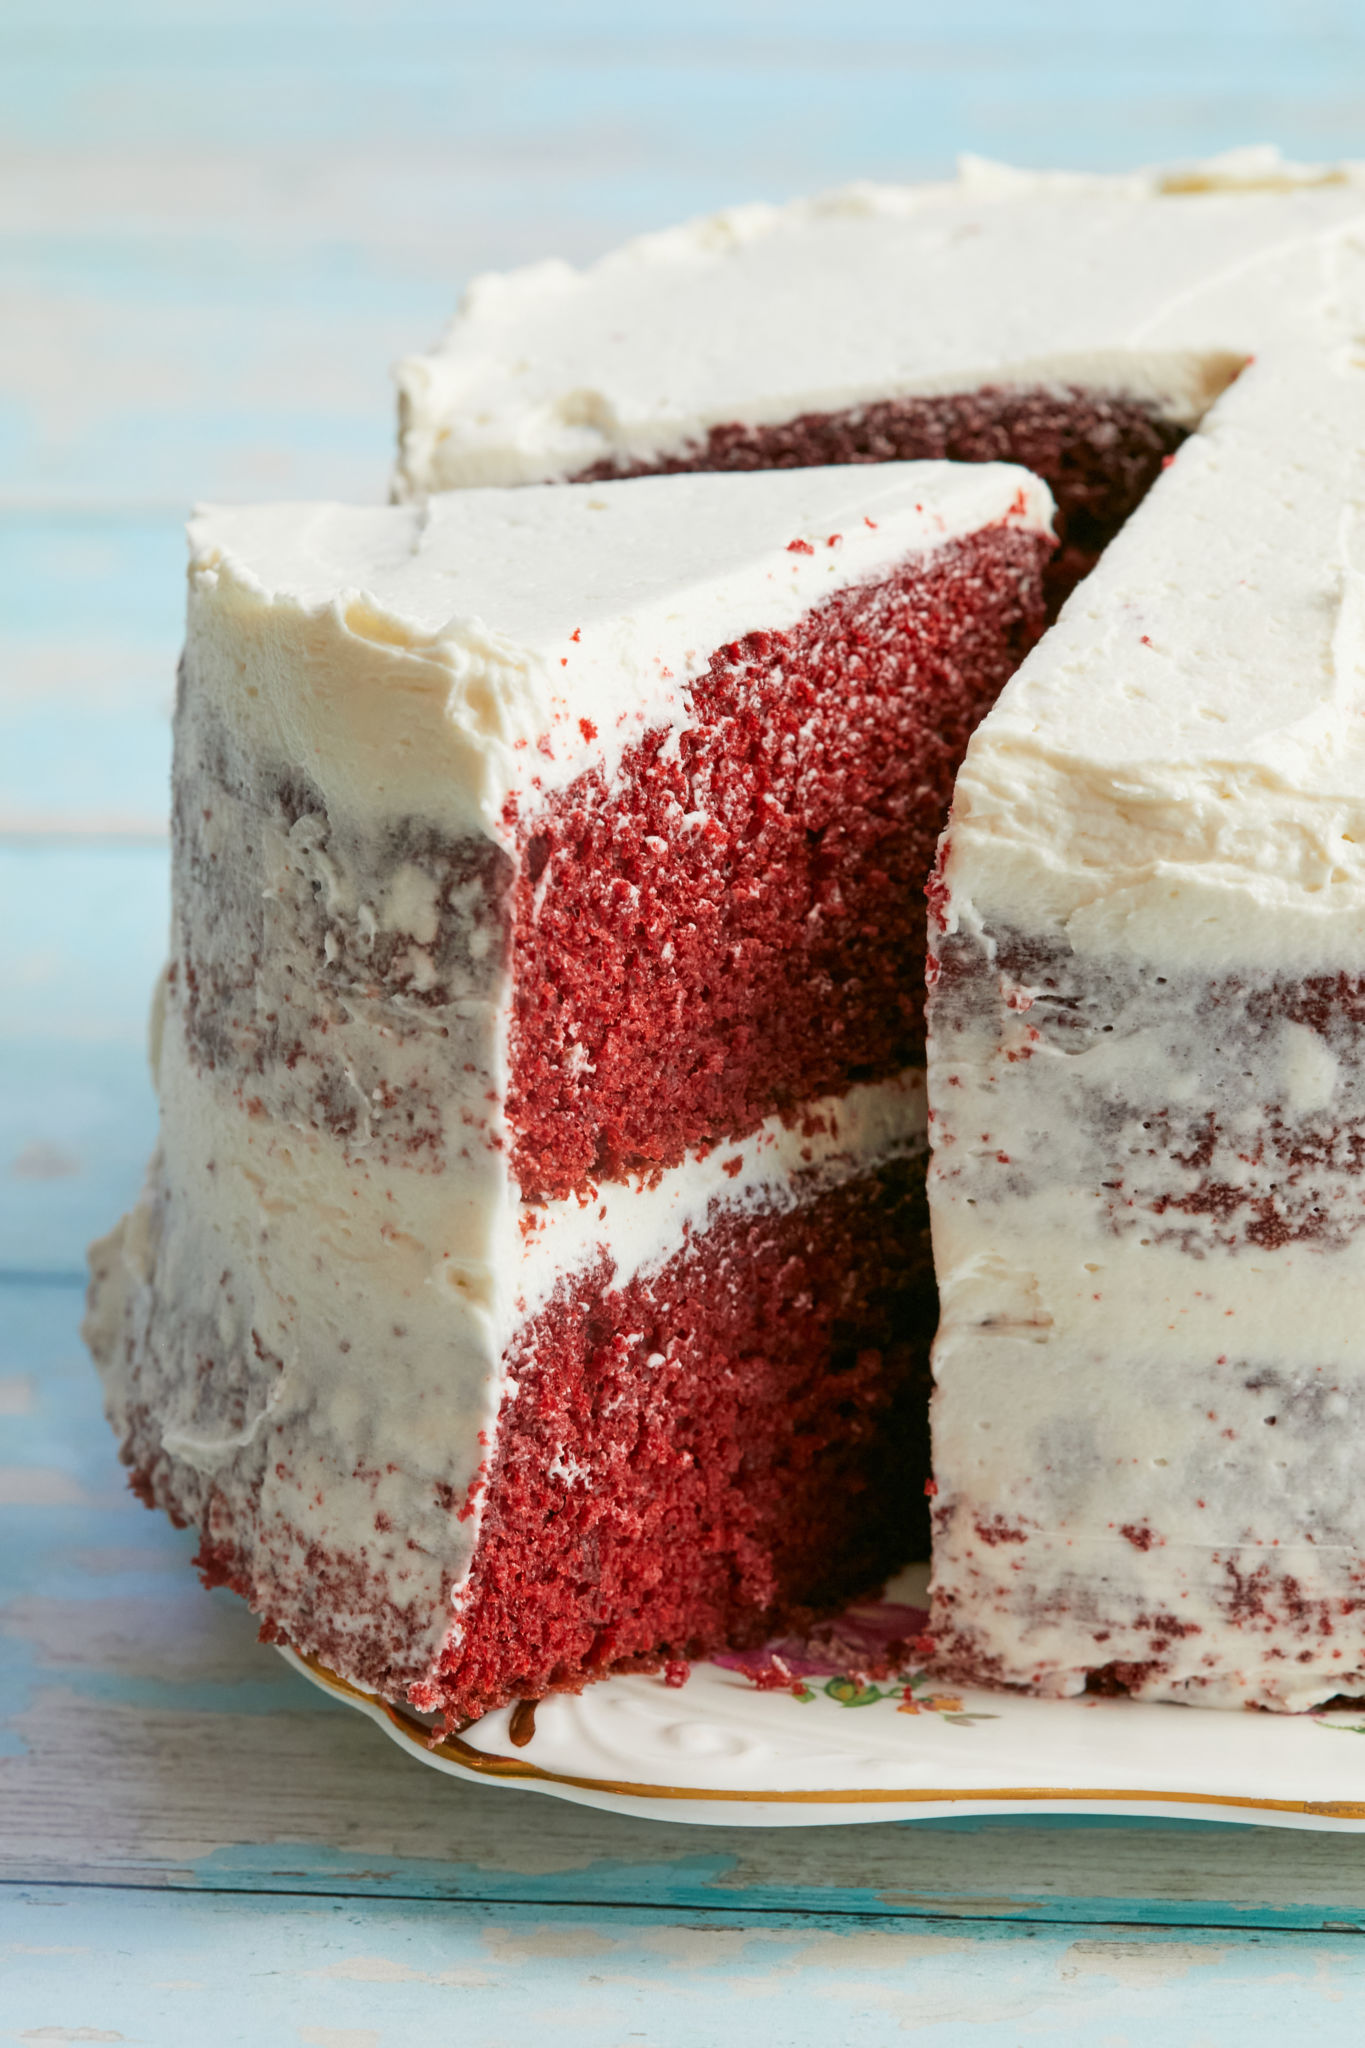 A slice of red velvet cake topped with my ermine frosting recipe.